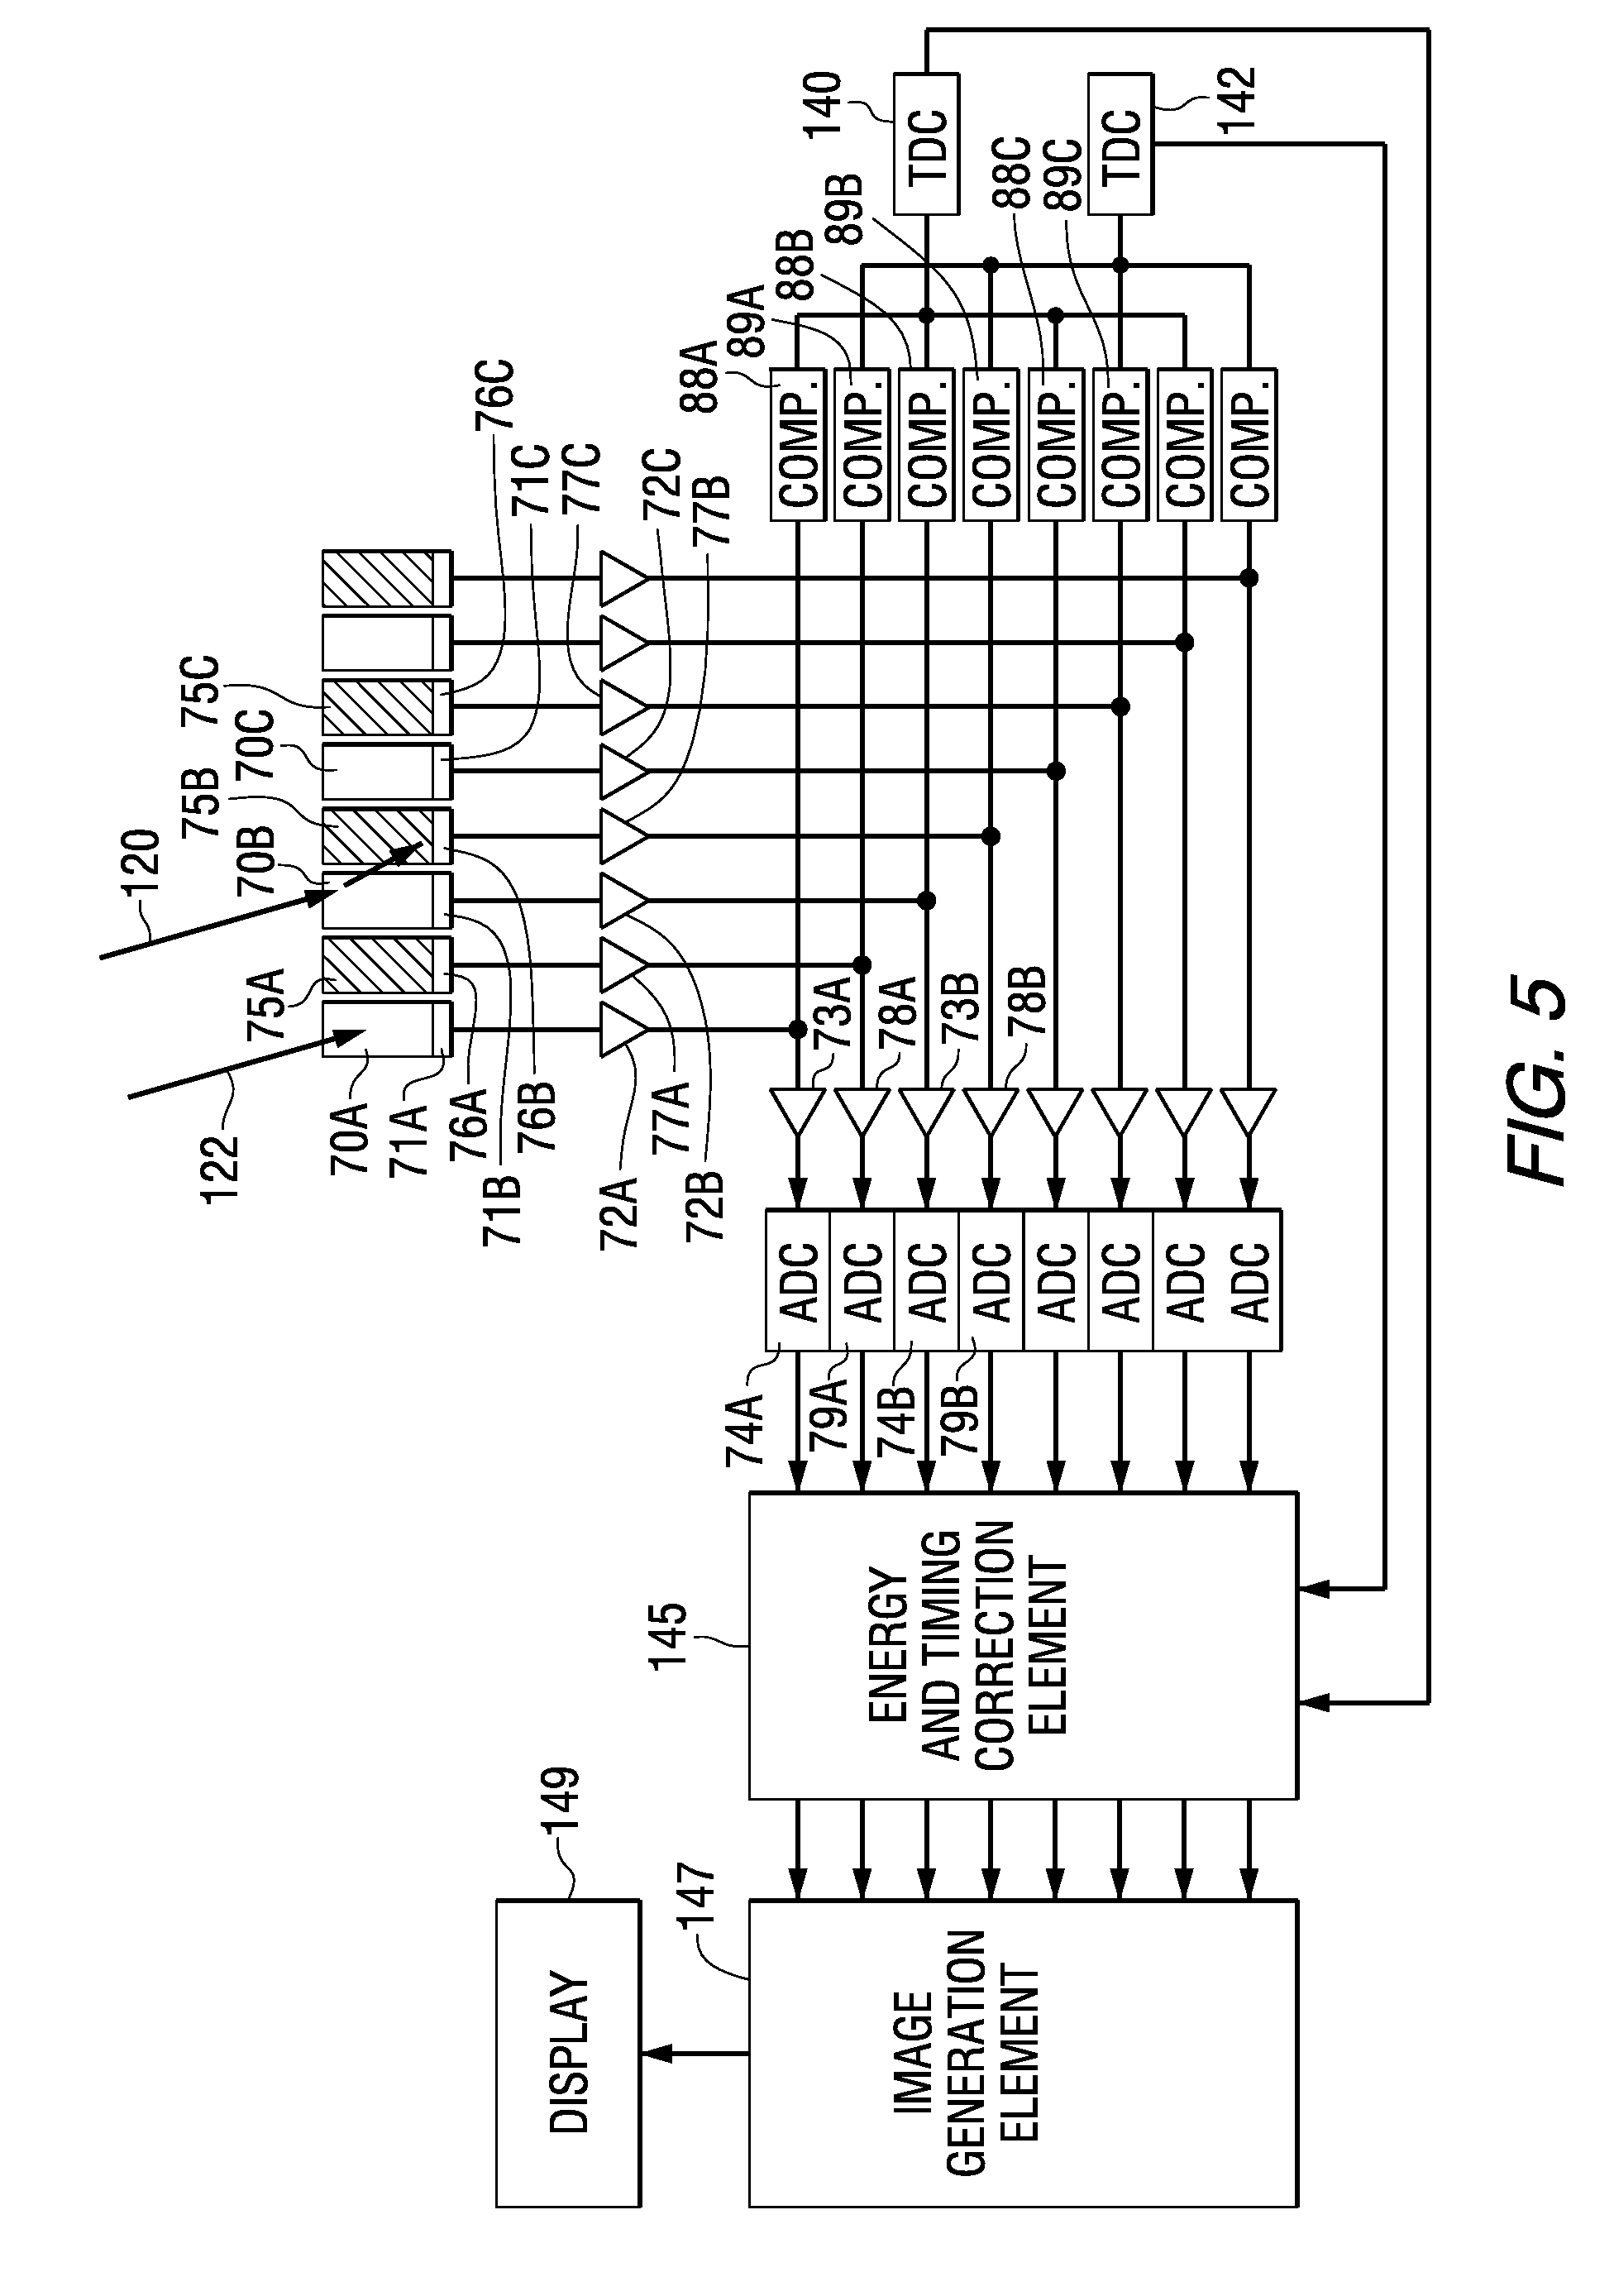 Multiplexing readout scheme for a gamma ray detector